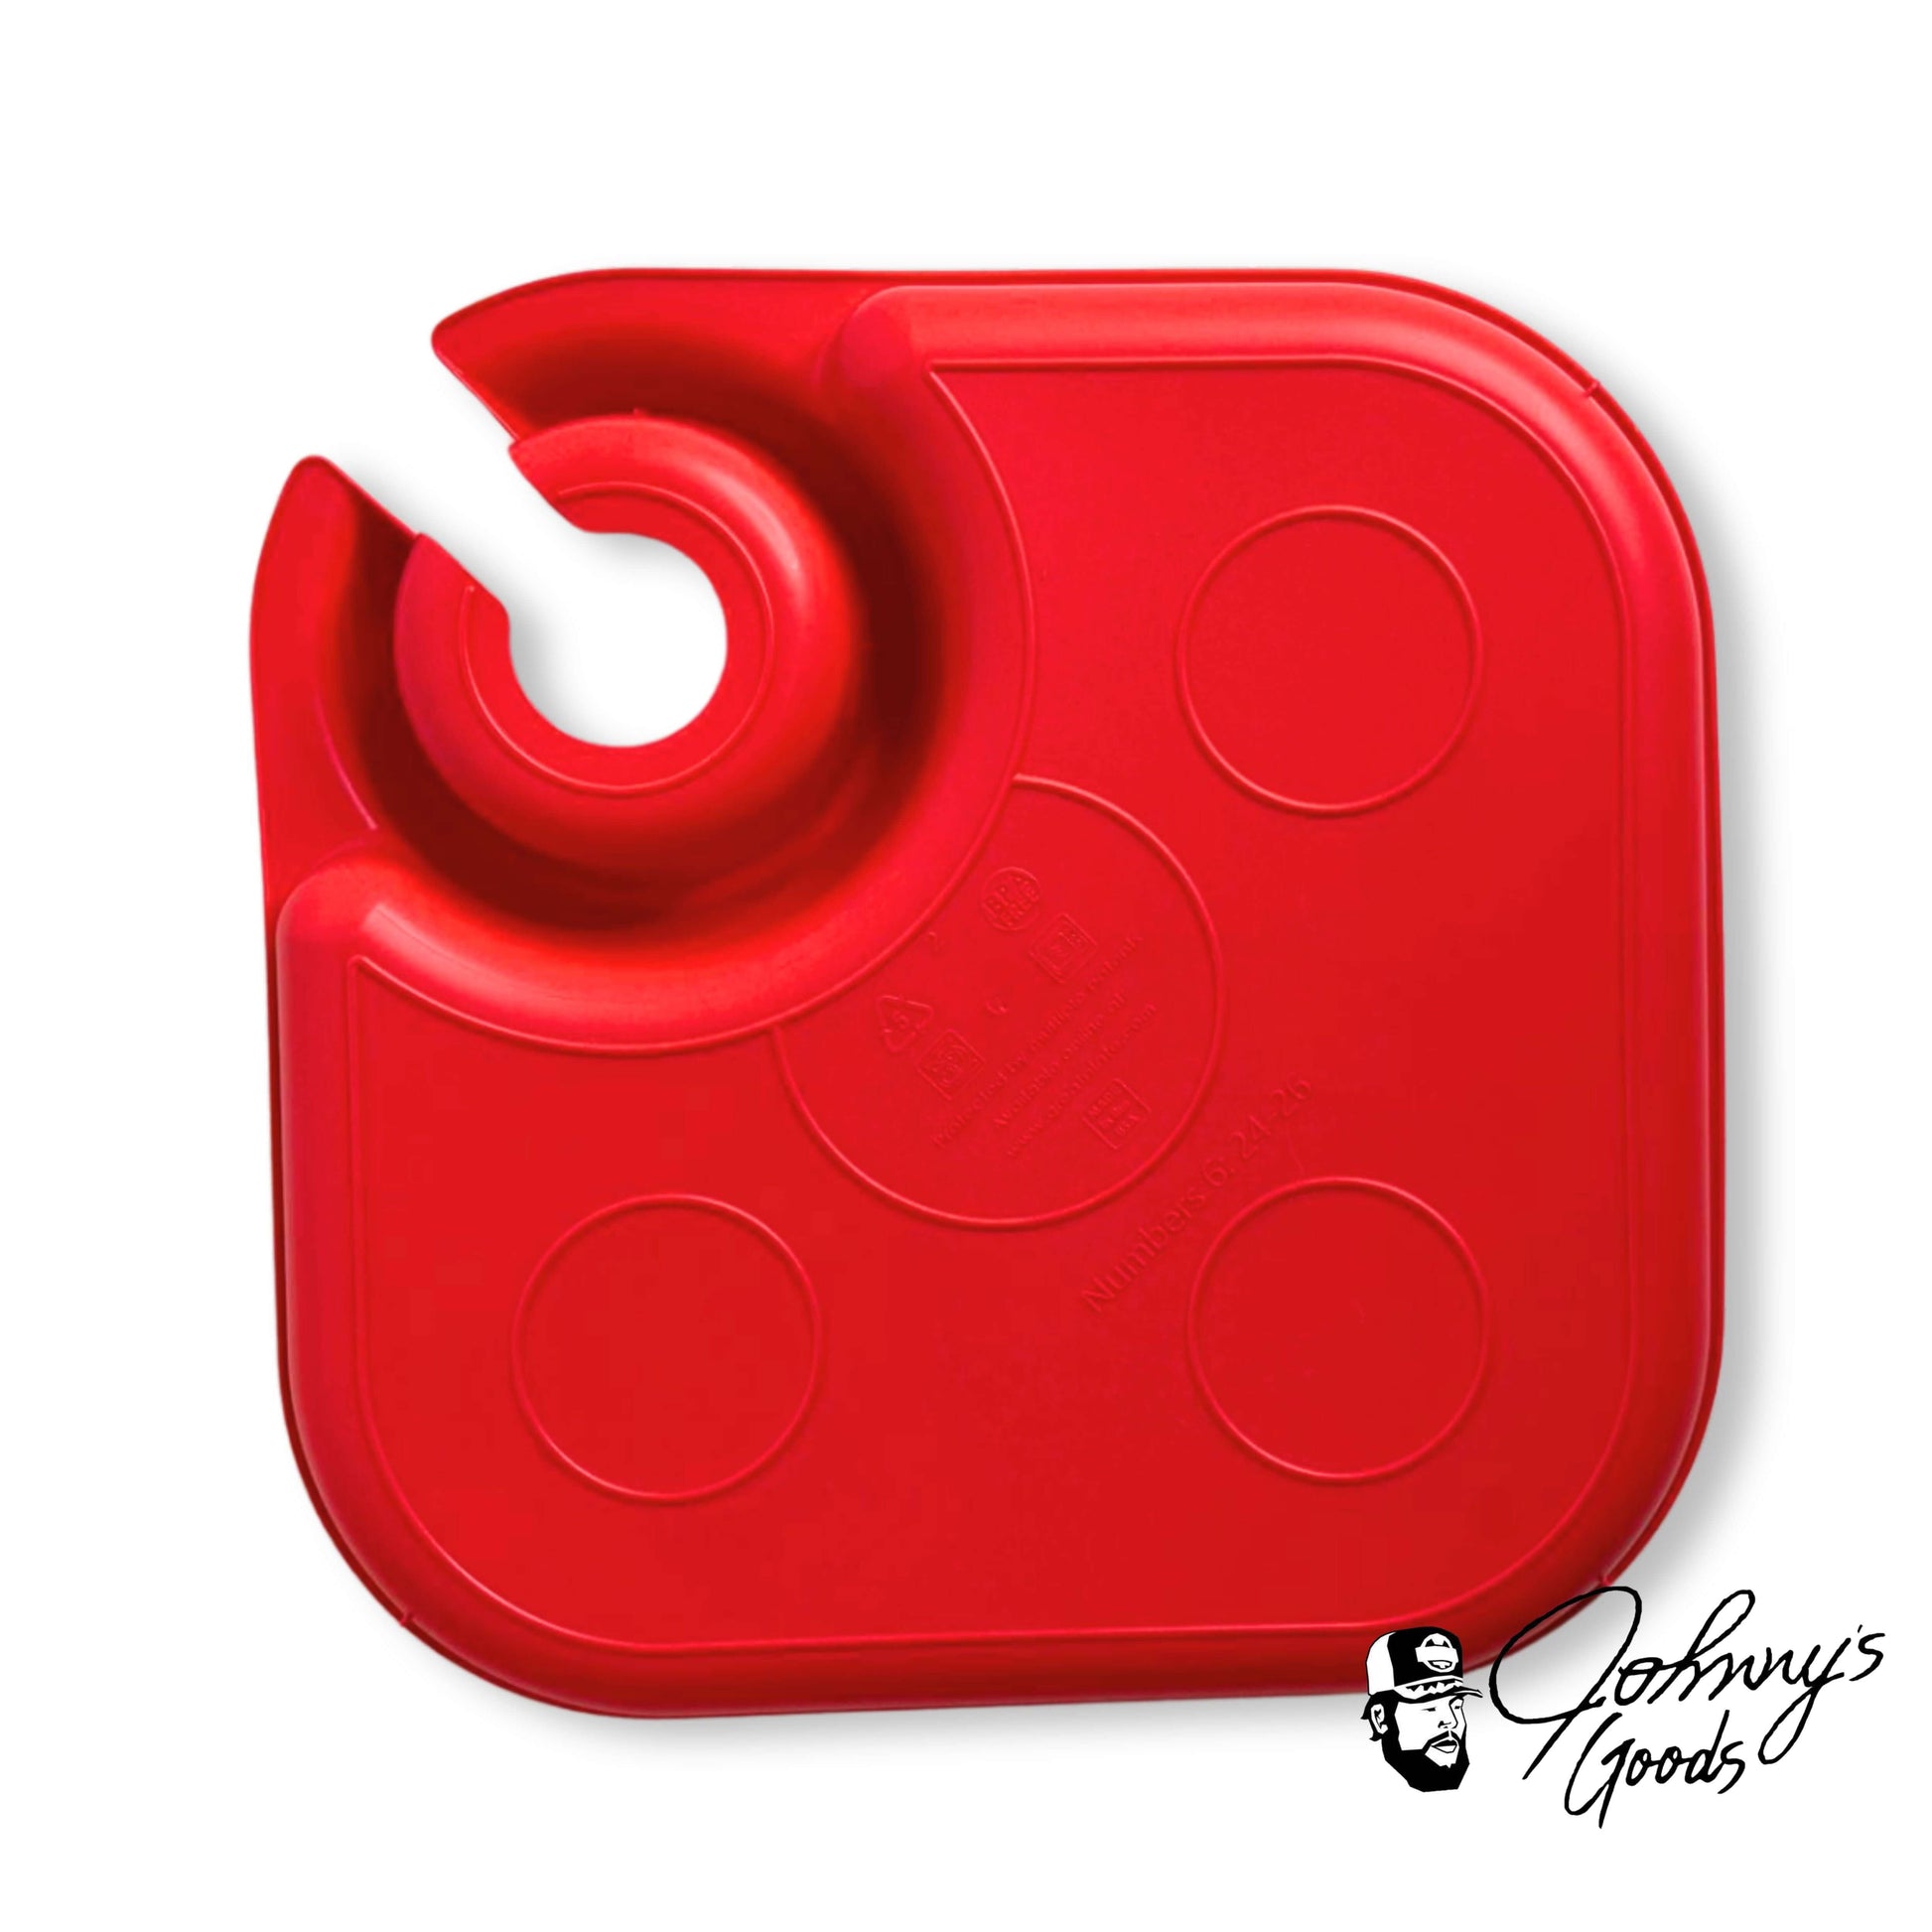 party plate with cup holder red plastic plates square